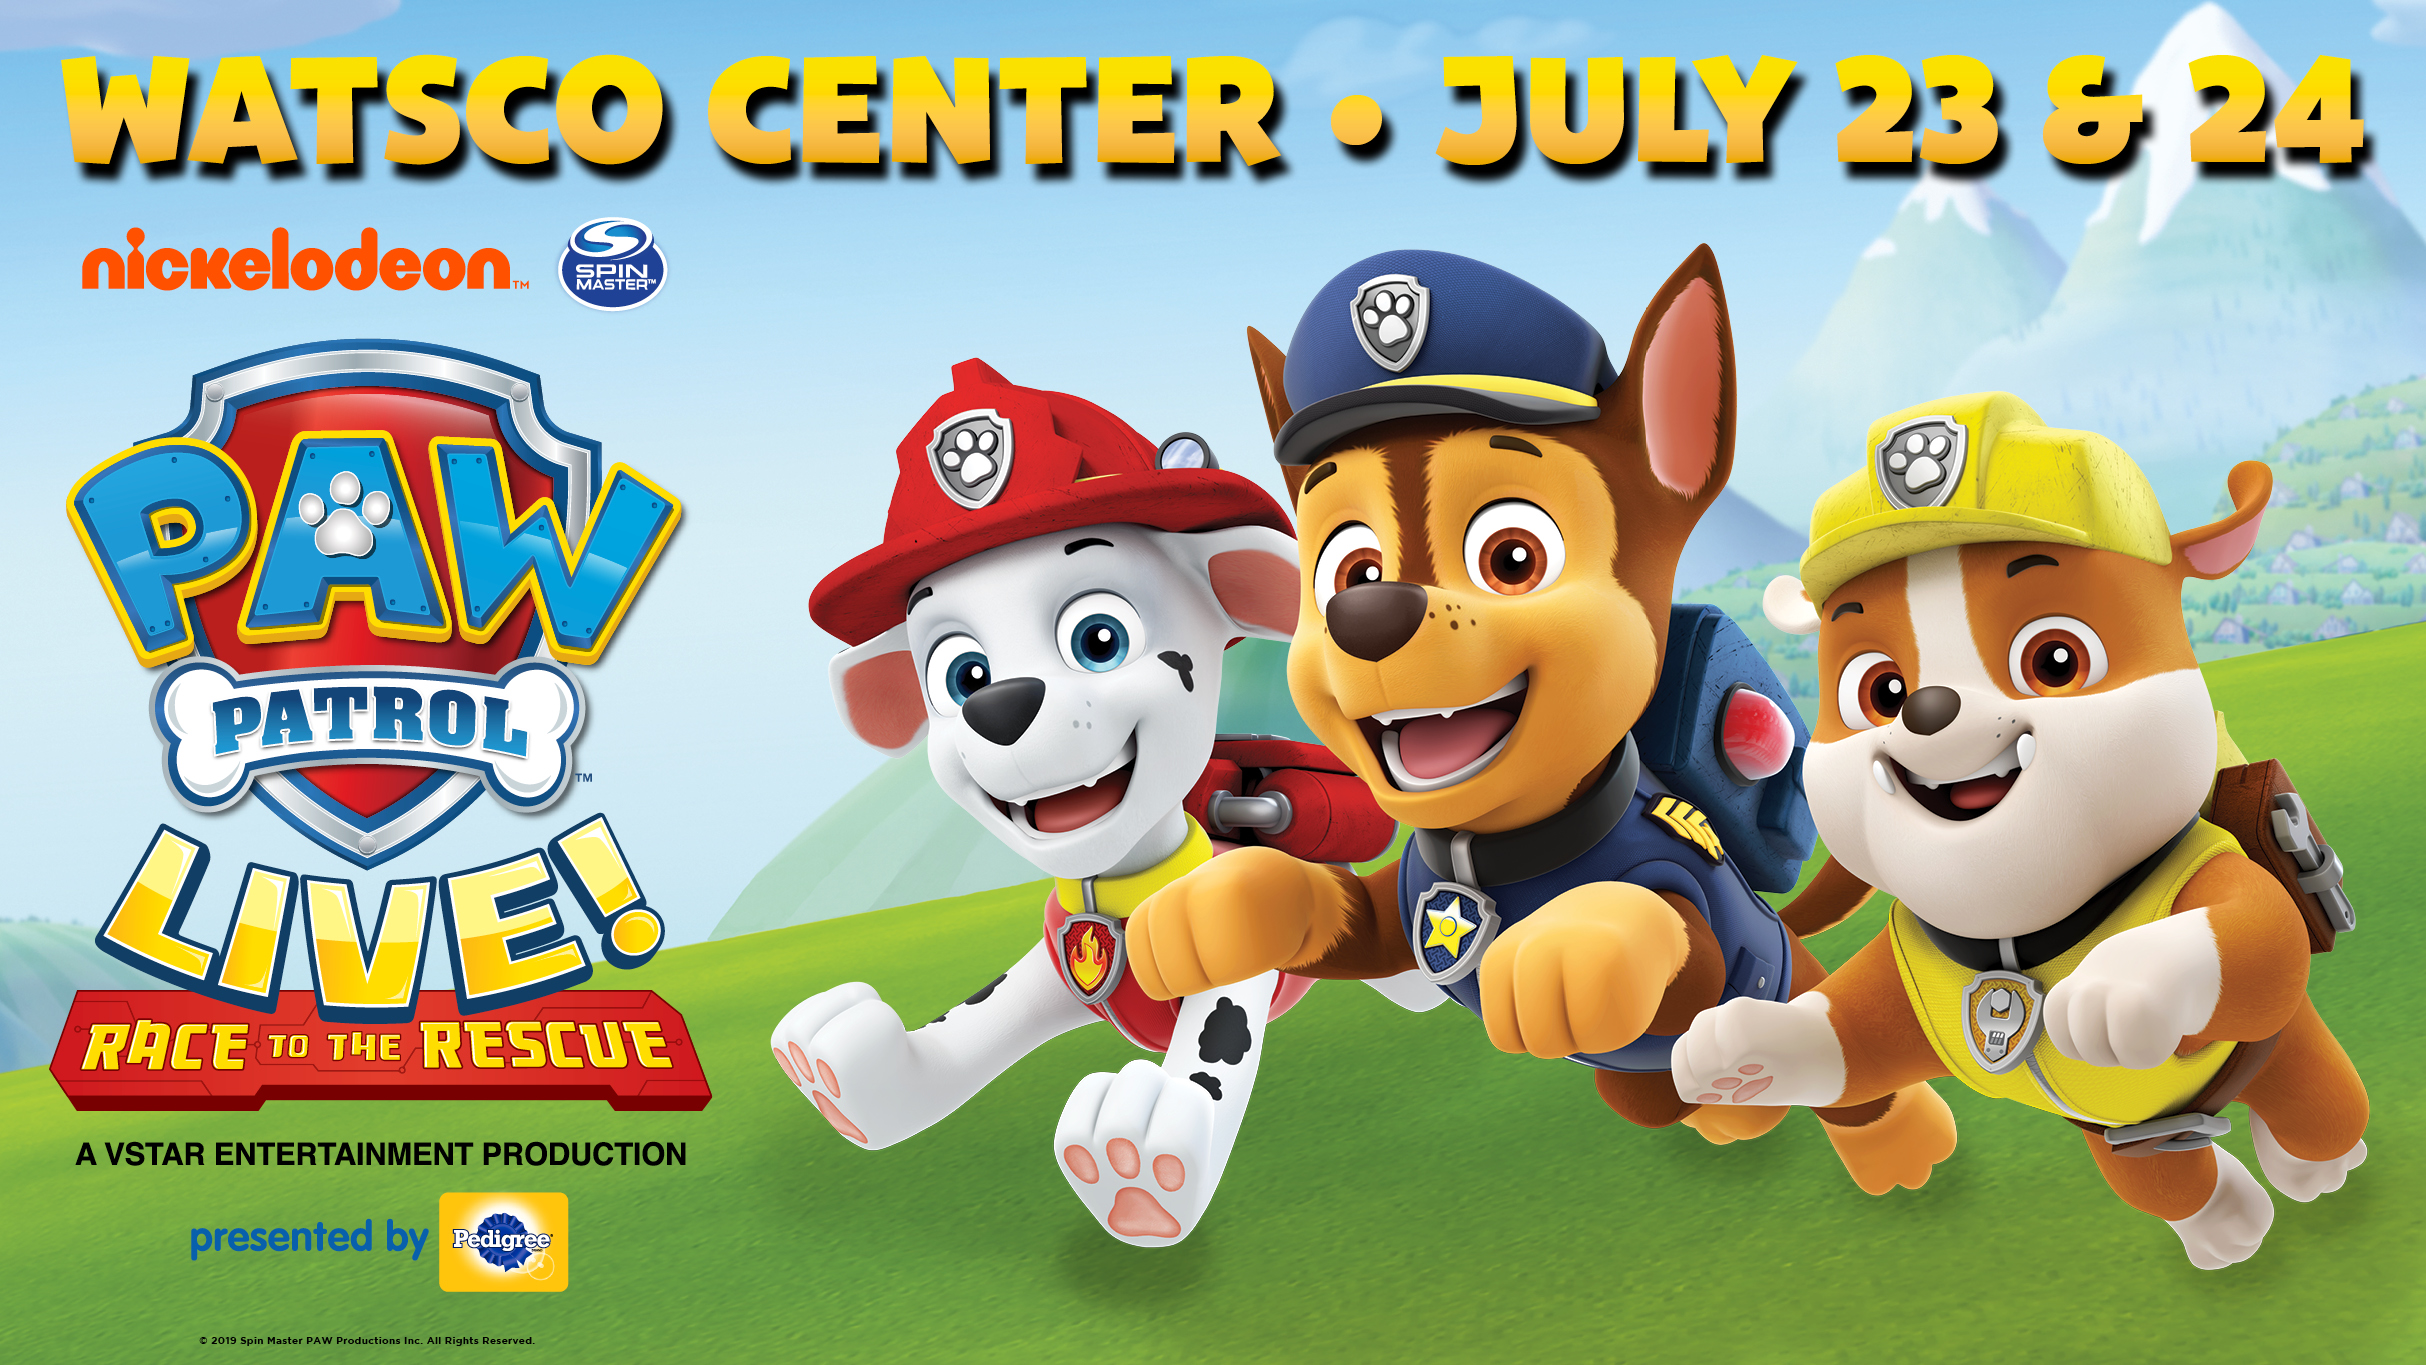 Paw Patrol “Race the Rescue” – Center